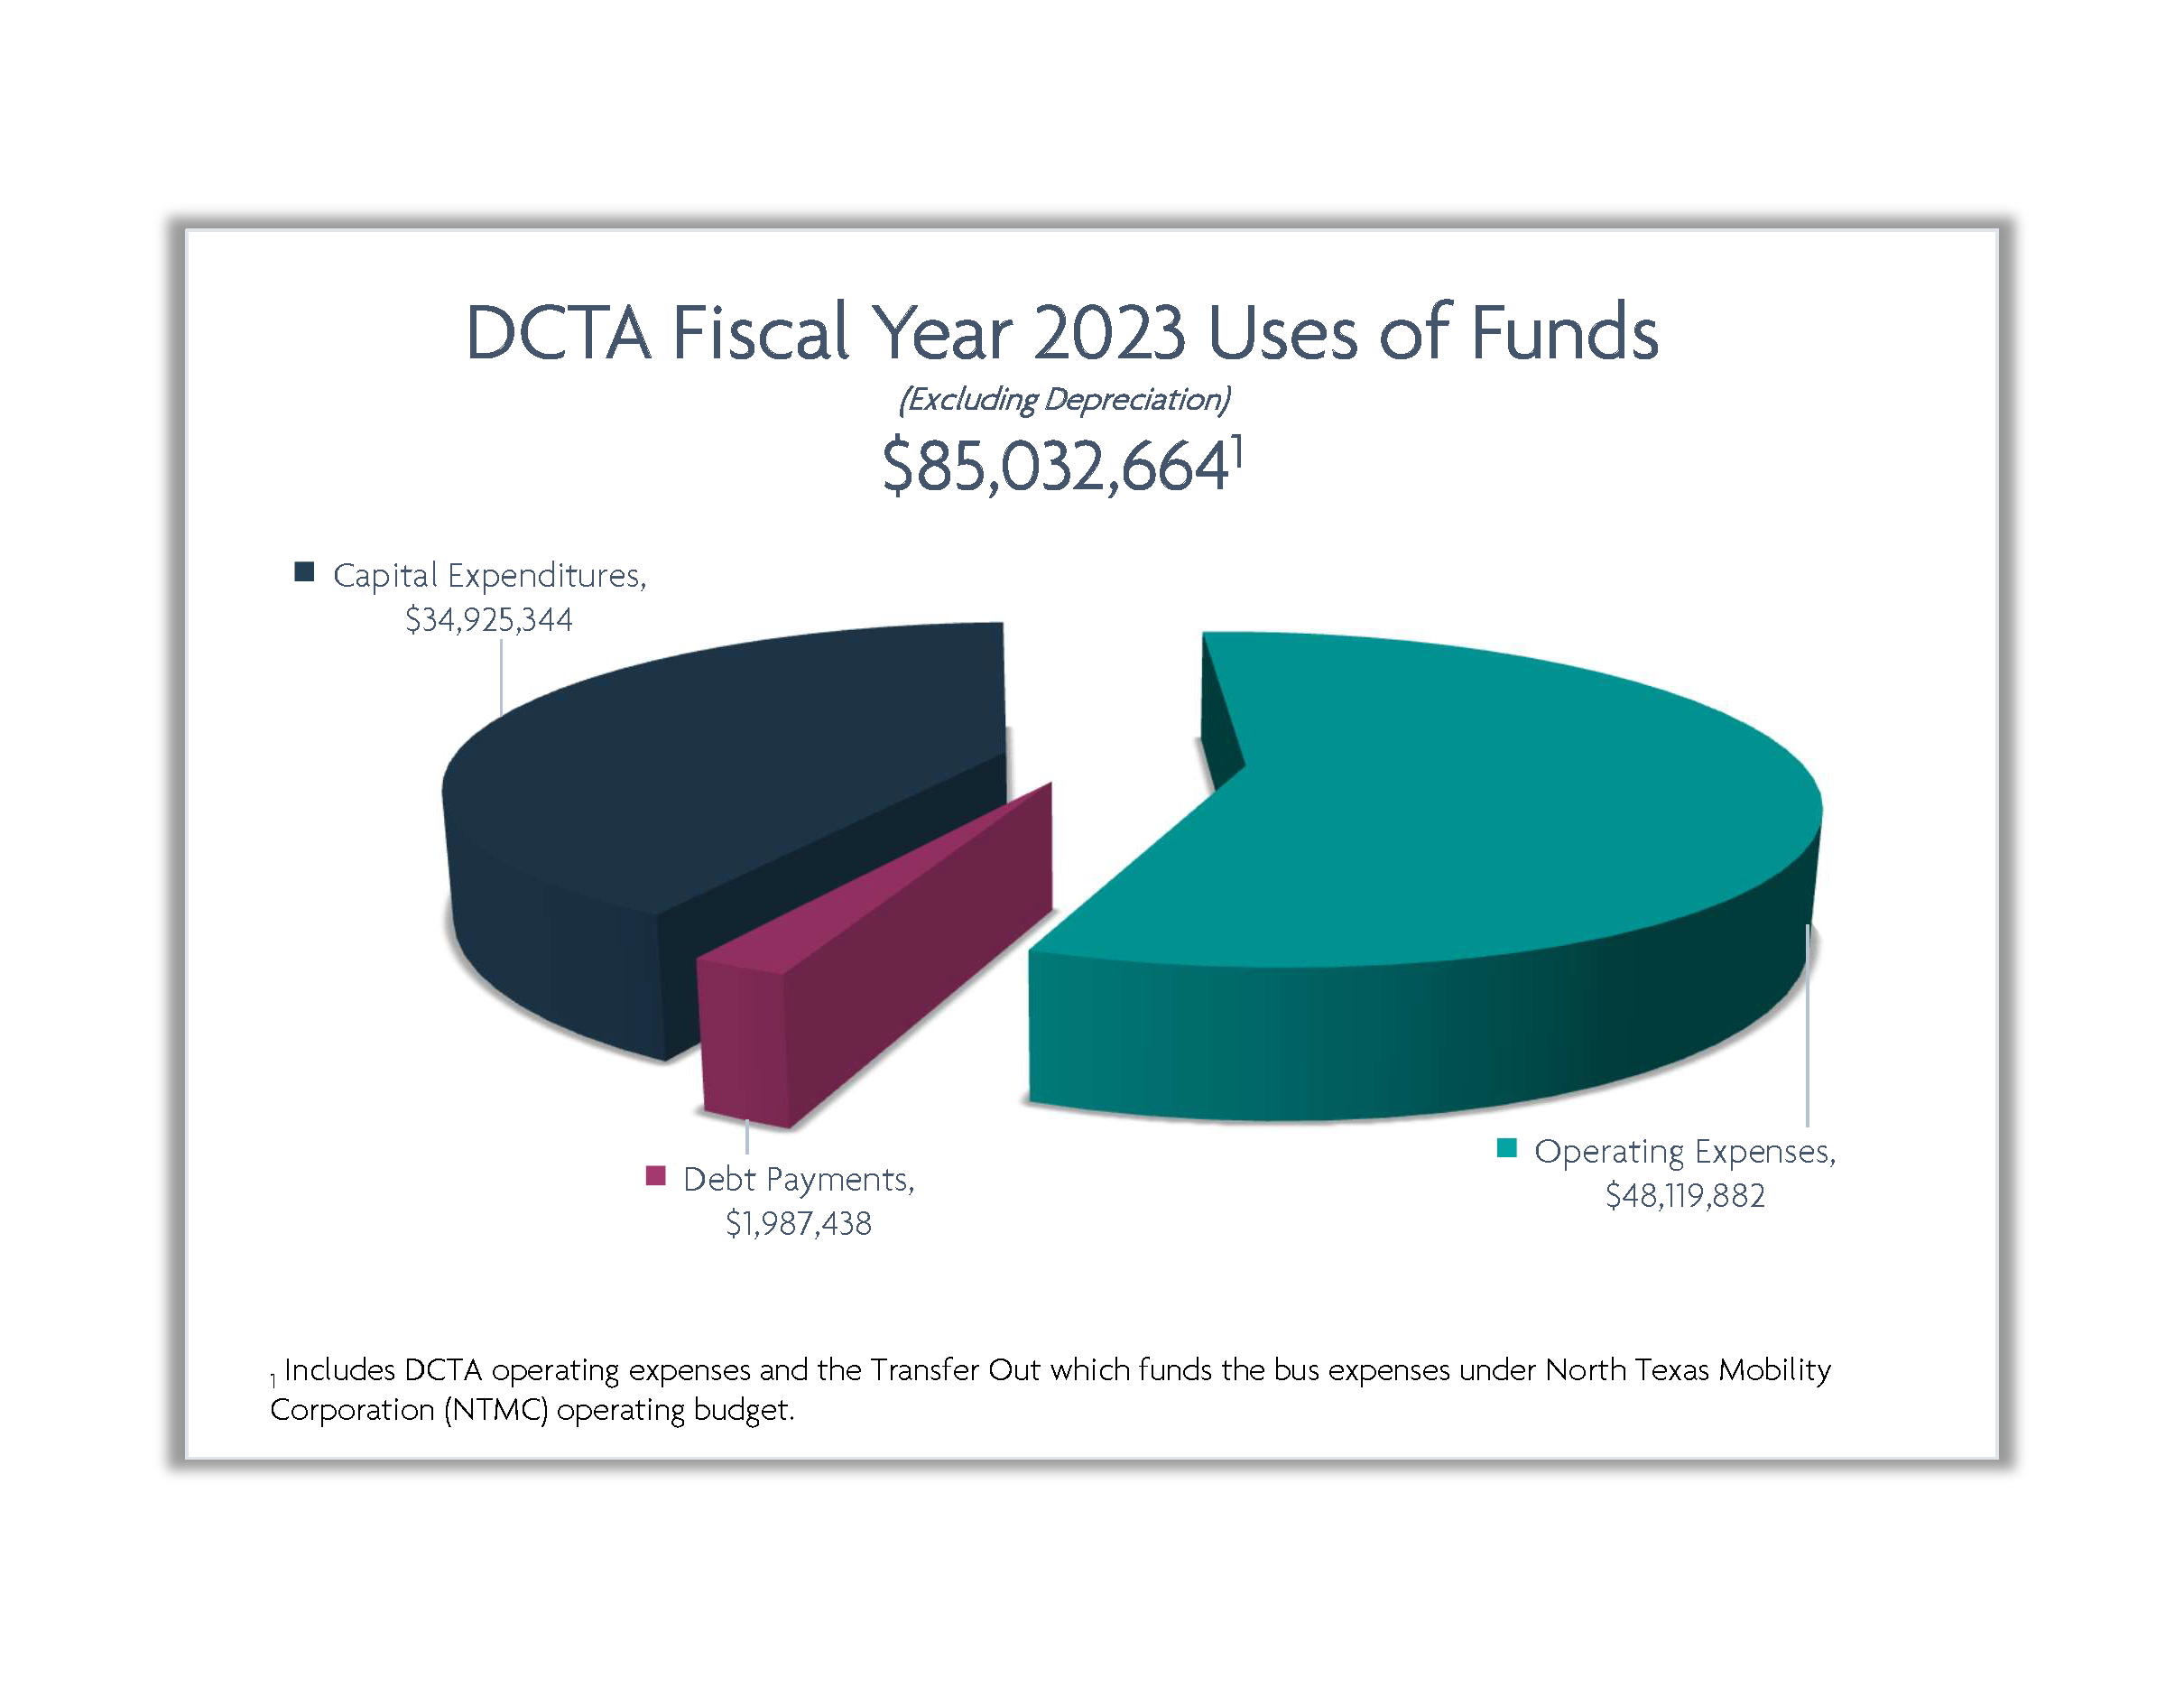 DCTA Fiscal Year 2023 Uses of Funds Pie Graph